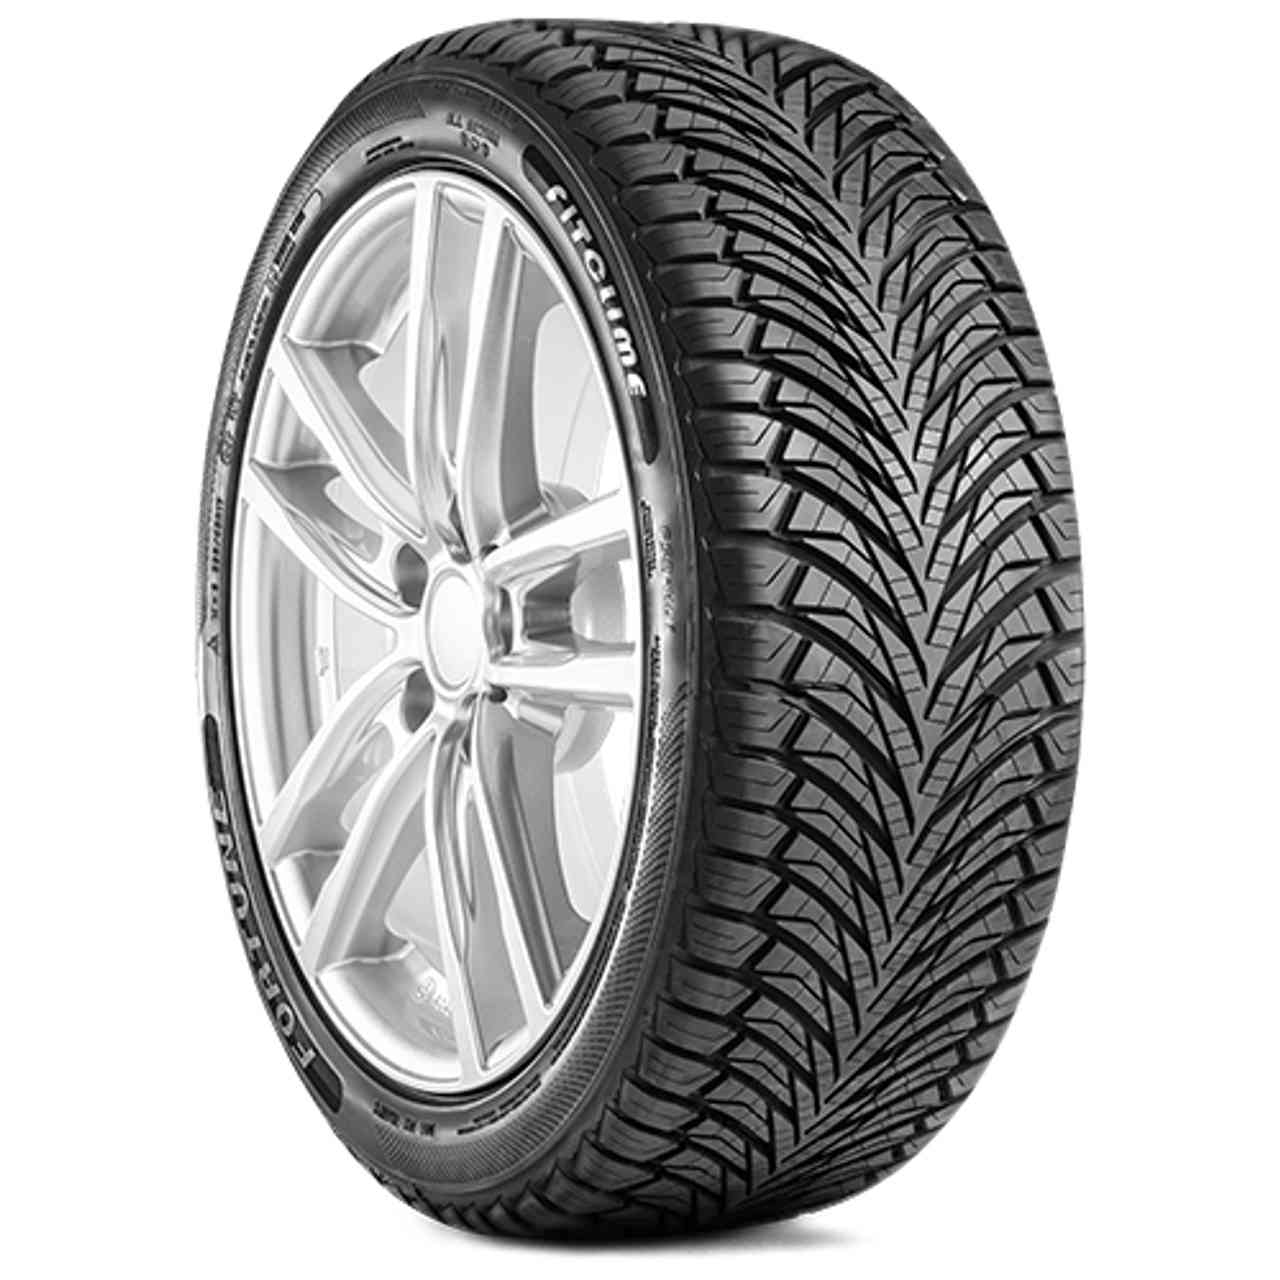 FORTUNE FITCLIME FSR-401 195/60R15 88H BSW